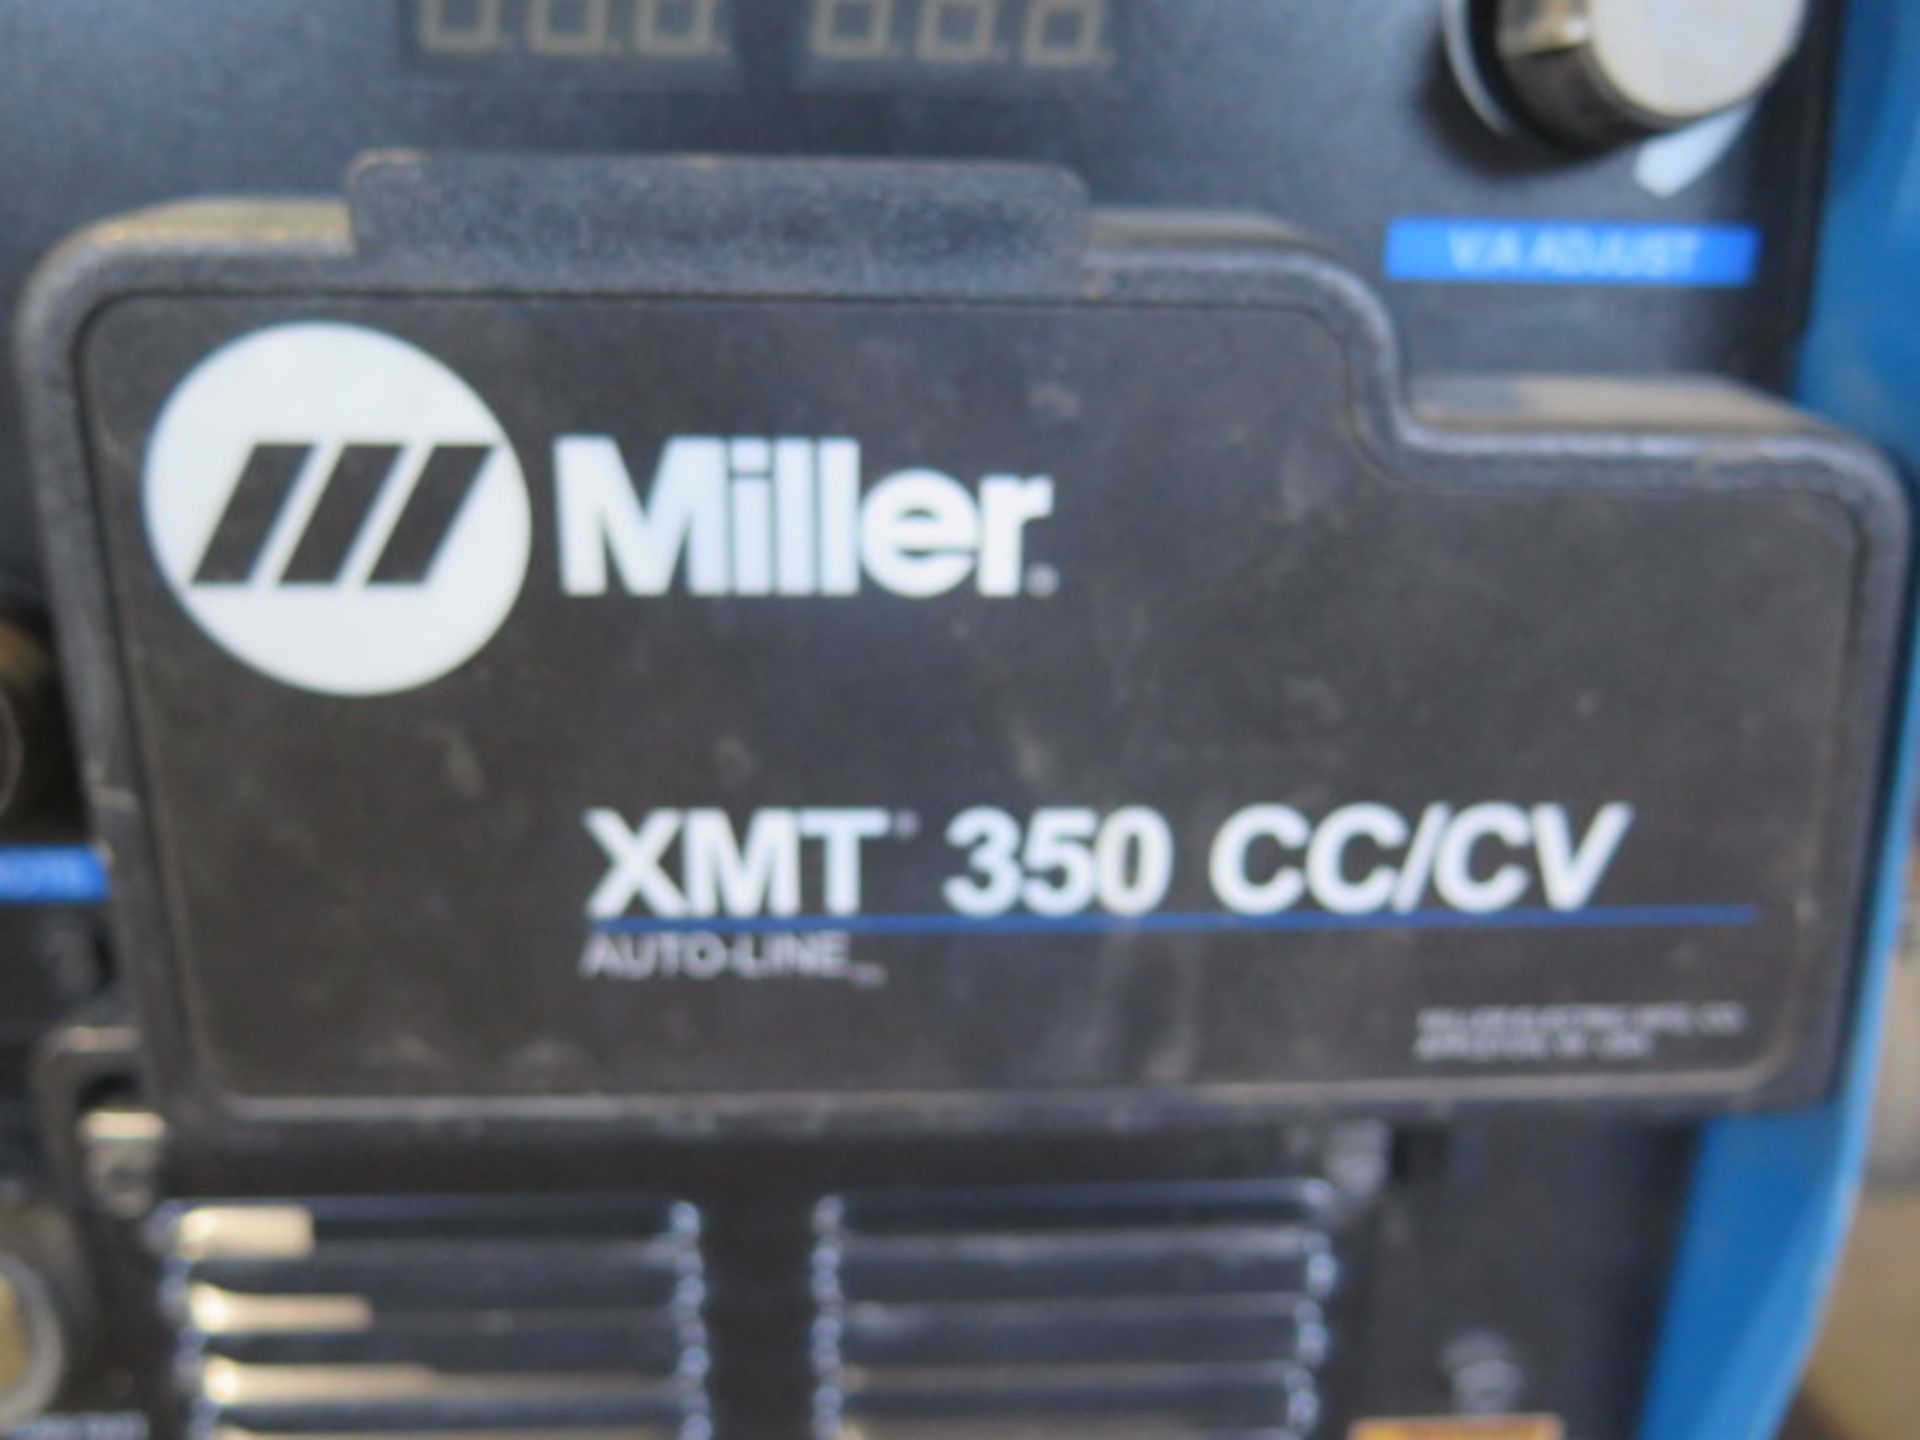 Miller XMT 350 CC/CV Arc Welding Power Source (NO CABLES) (SOLD AS-IS - NO WARRANTY) - Image 7 of 7